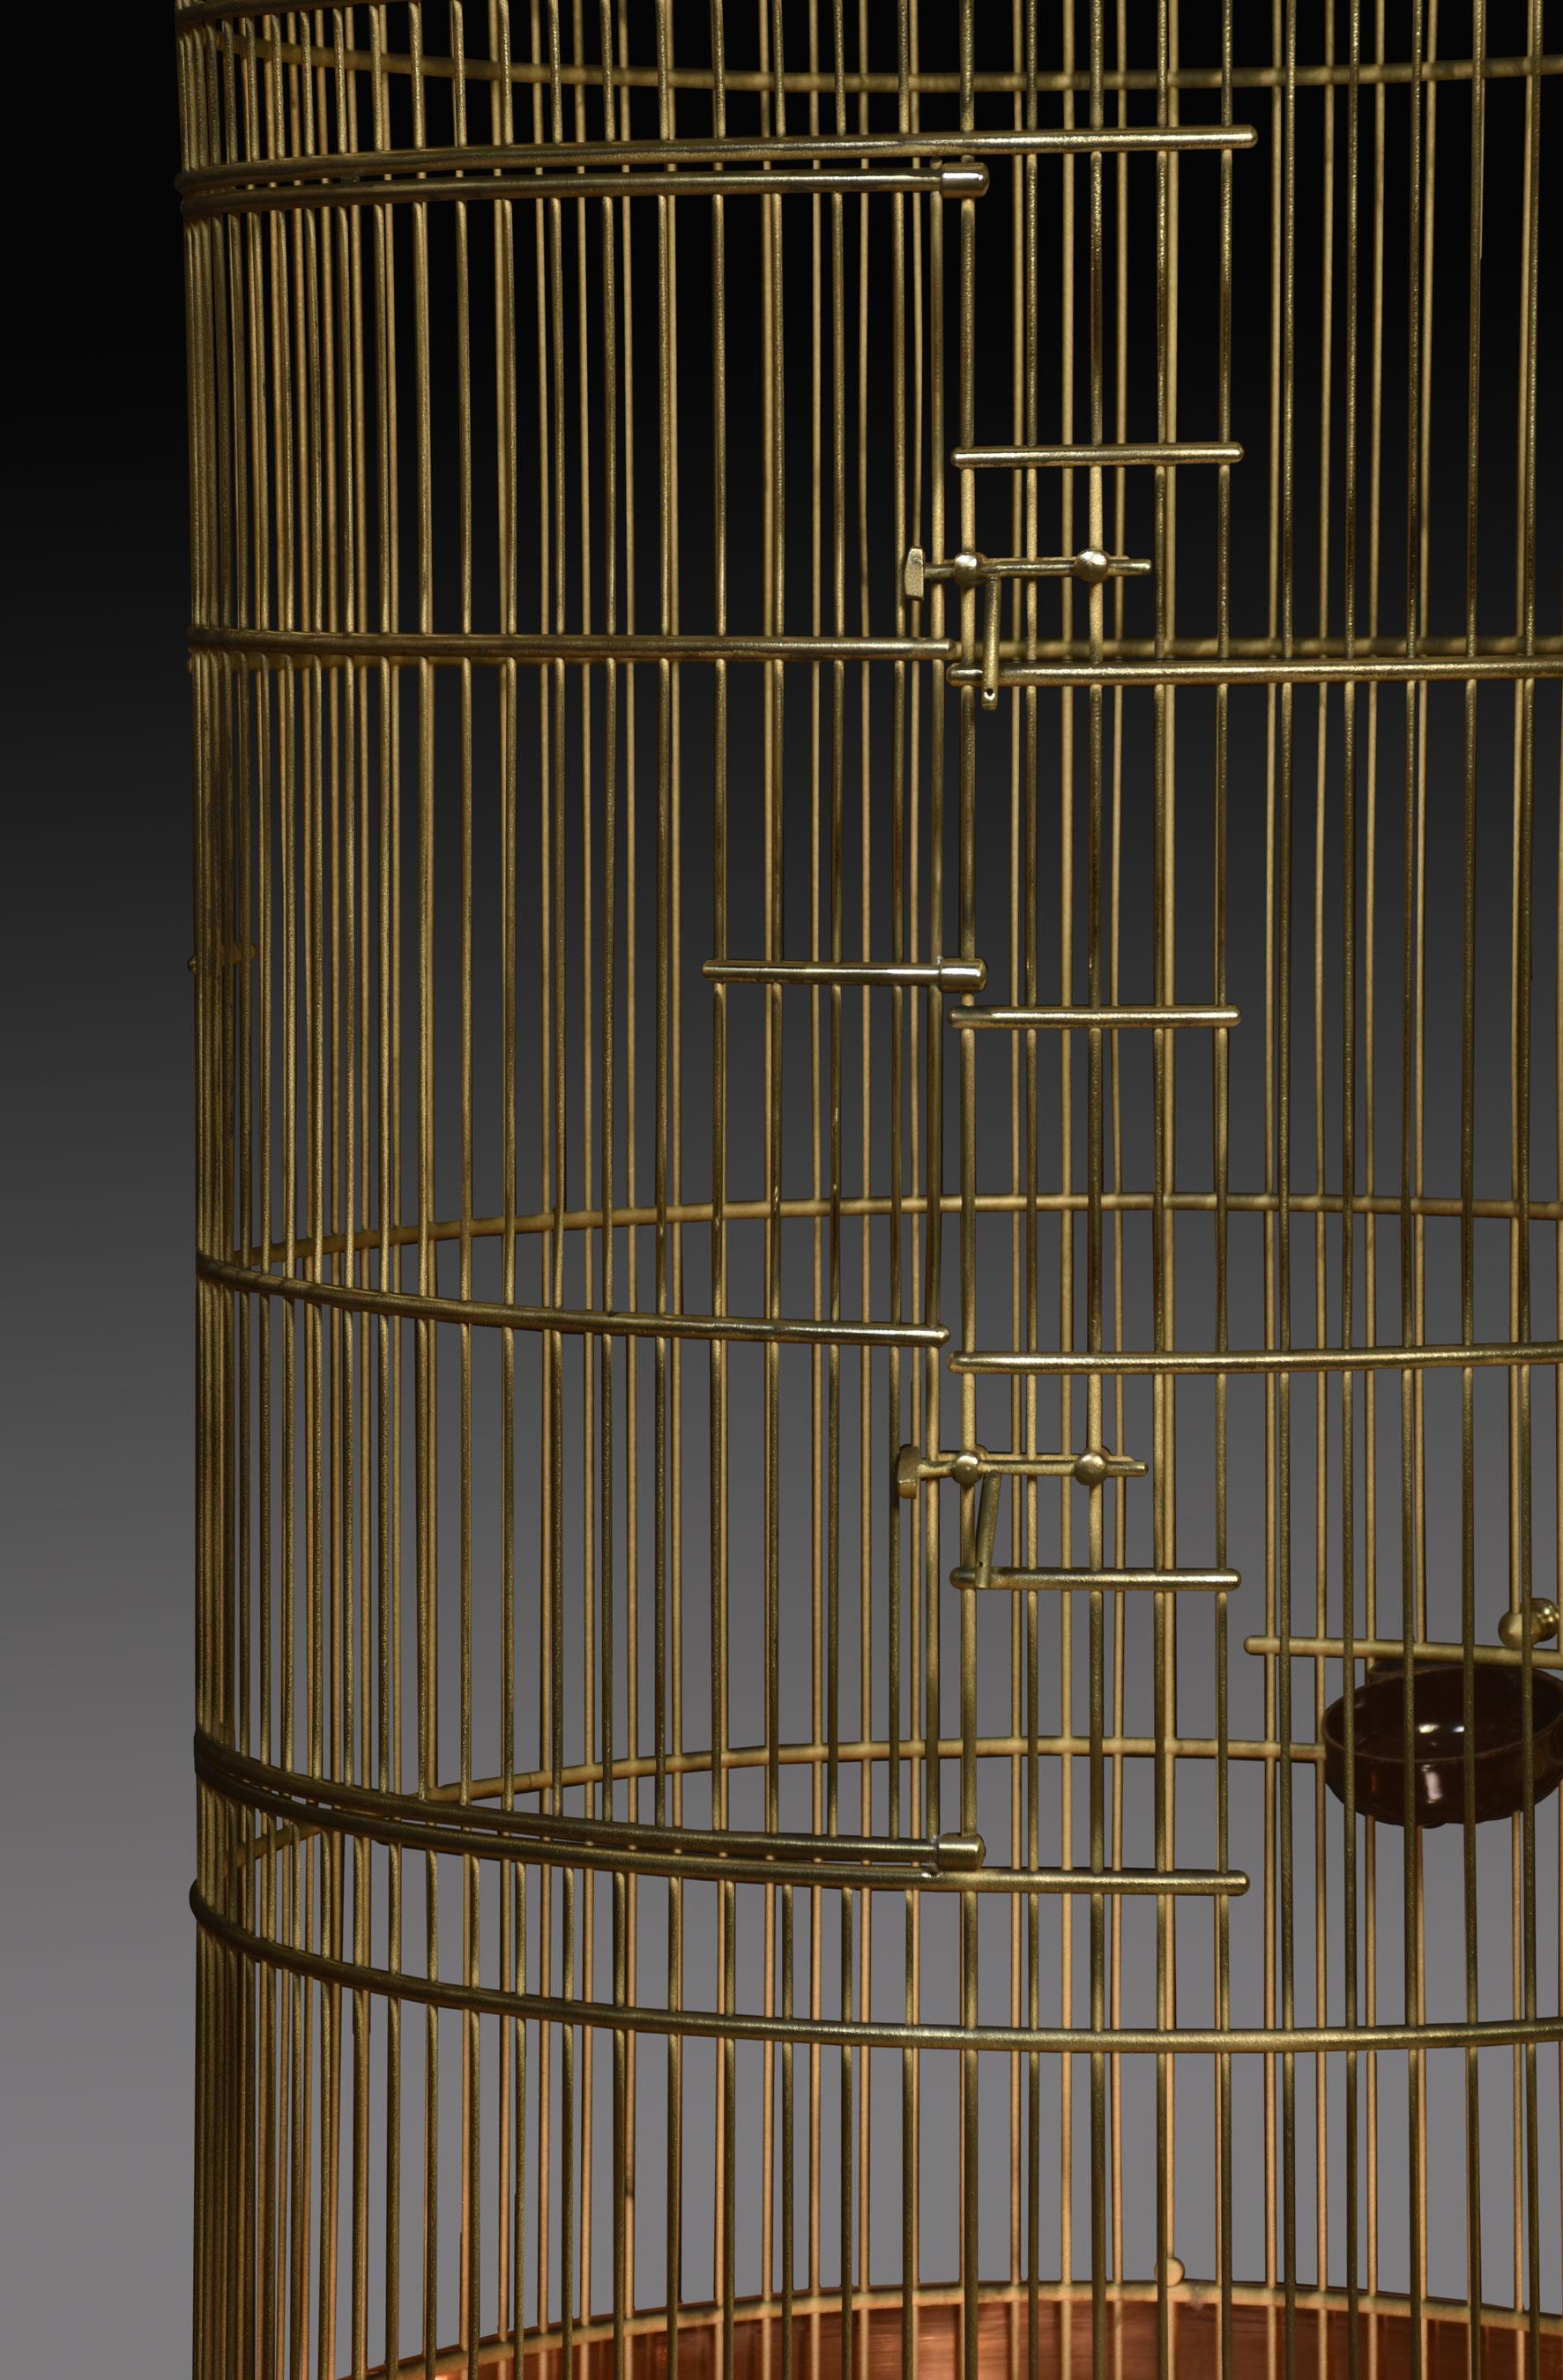 Brass and copper bird cage having a dome-shaped cage resting on a circular stepped copper base.
Dimensions
Height 75 Inches
Width 25 Inches
Depth 25 Inches

Cage Dimensions
Height 55.5 Inches
Width 24 Inches
Depth 24 Inches.